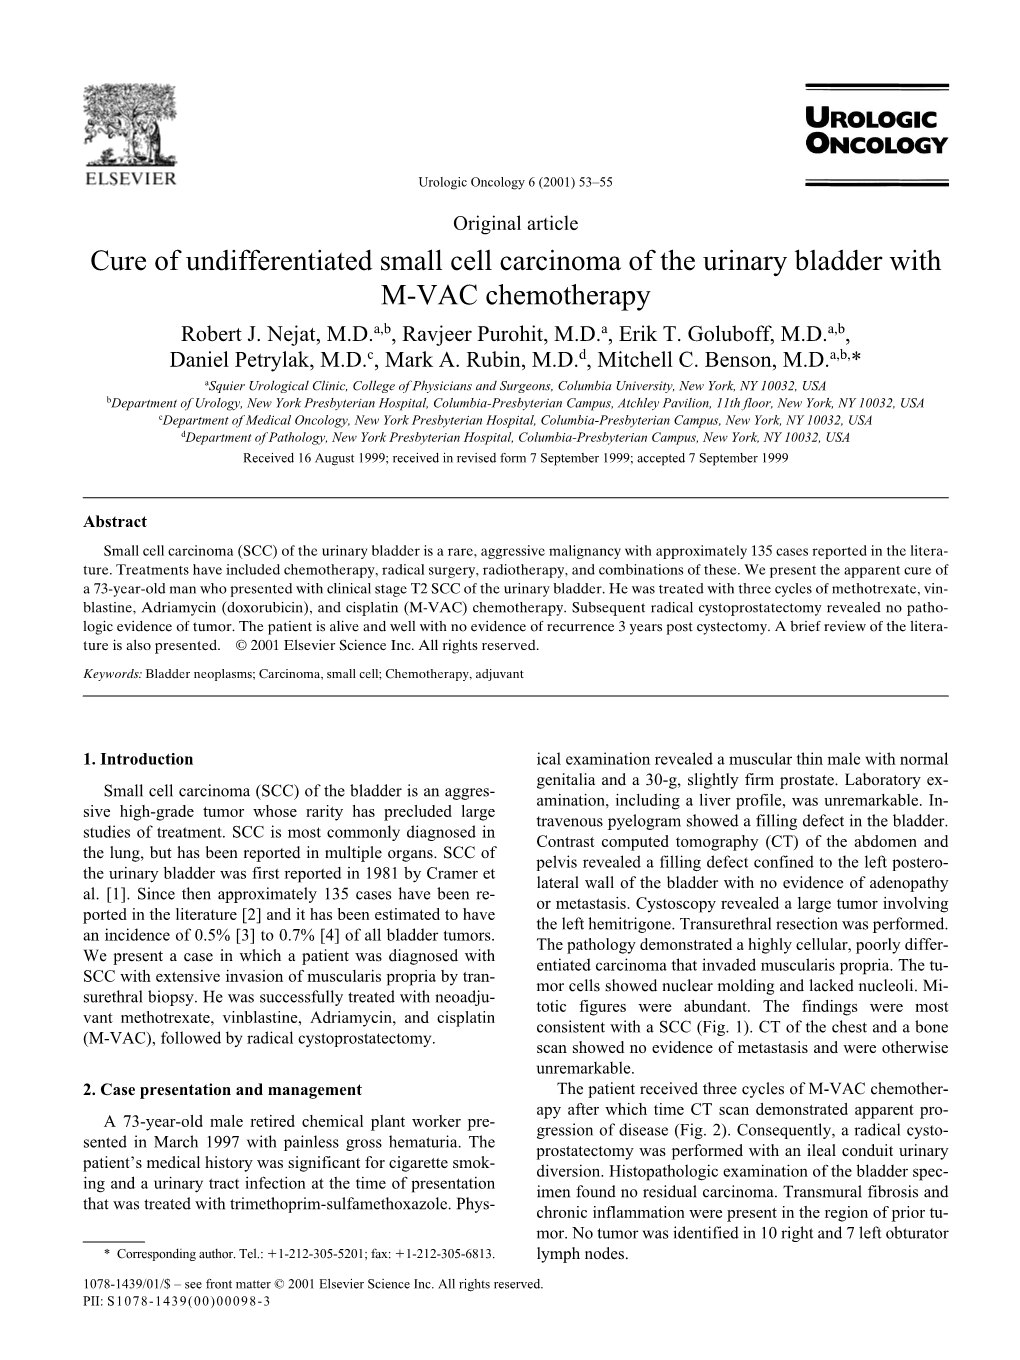 Cure of Undifferentiated Small Cell Carcinoma of the Urinary Bladder with M-VAC Chemotherapy Robert J